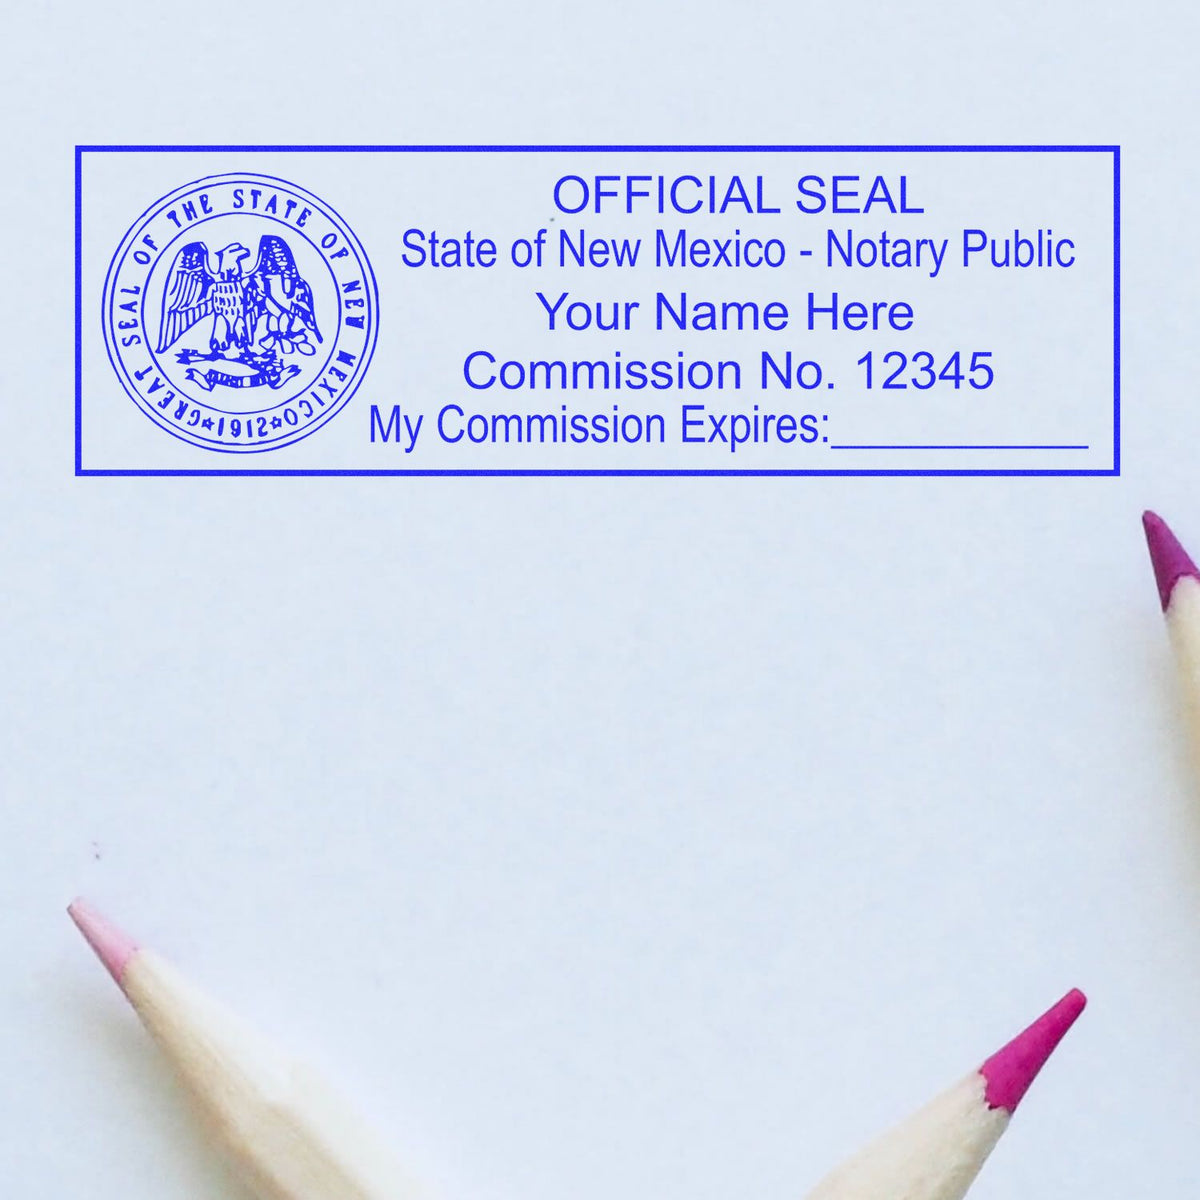 A photograph of the Heavy-Duty New Mexico Rectangular Notary Stamp stamp impression reveals a vivid, professional image of the on paper.